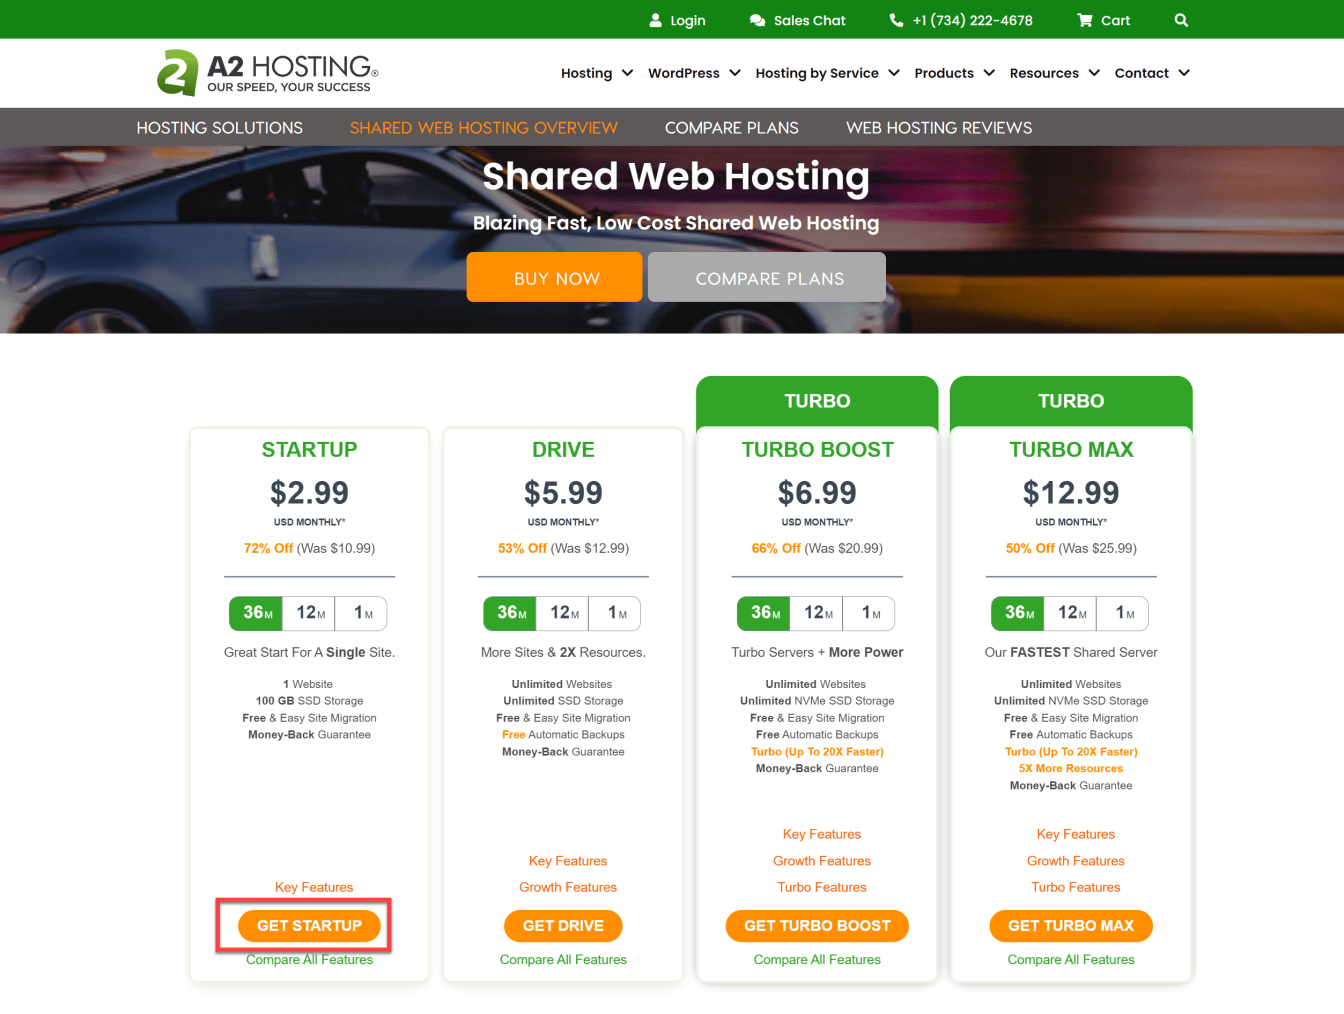 Step #1 - Activate the discount on A2 Hosting Hosting.